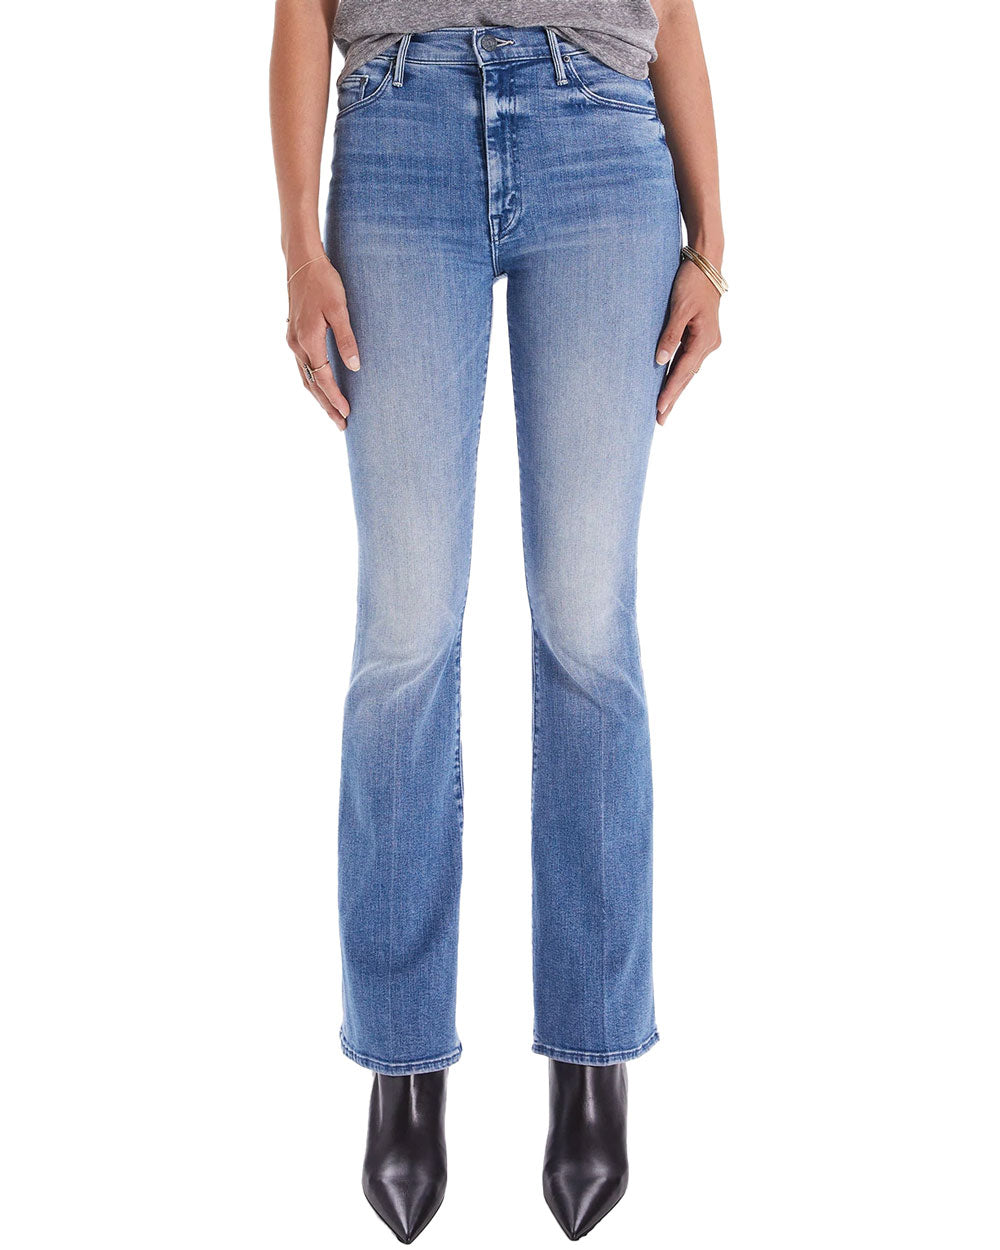 High Waisted Weekender Skimp Jean in We The Animals